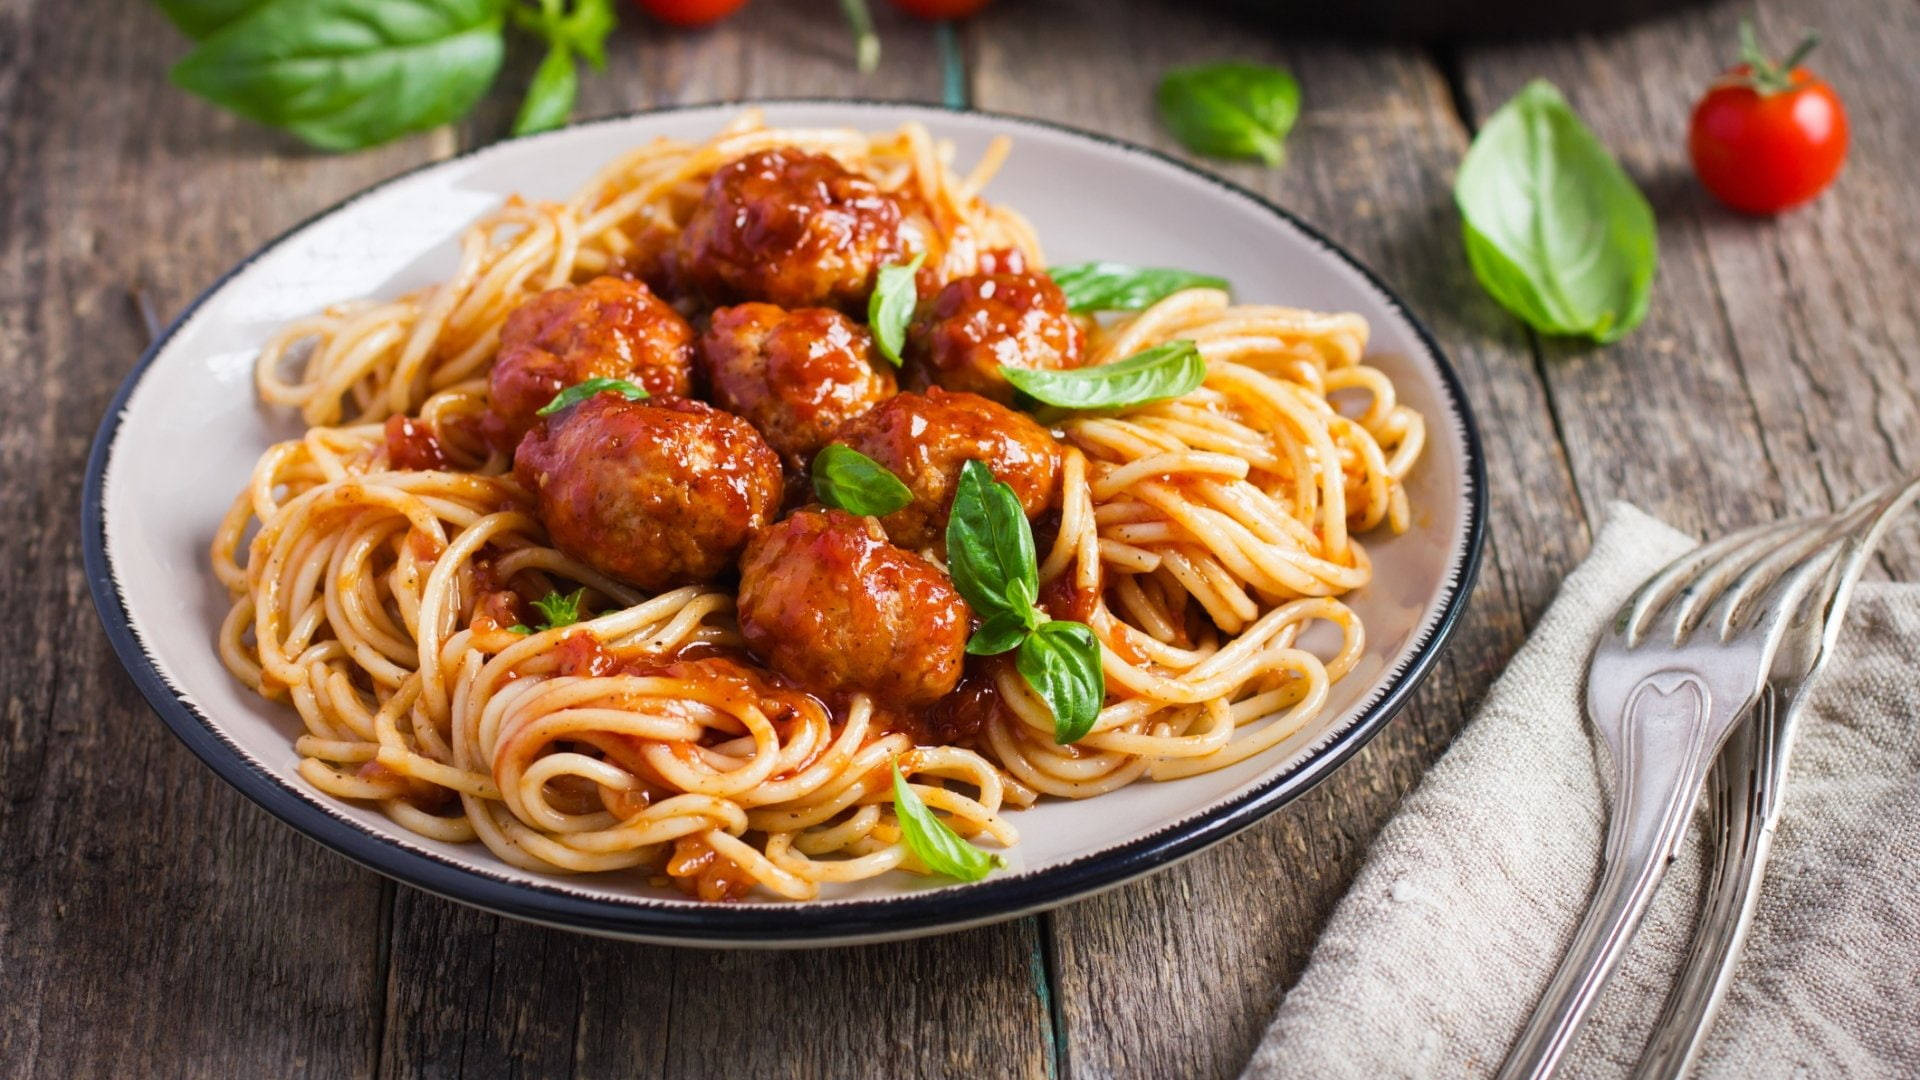 Pasta With Meatballs Background